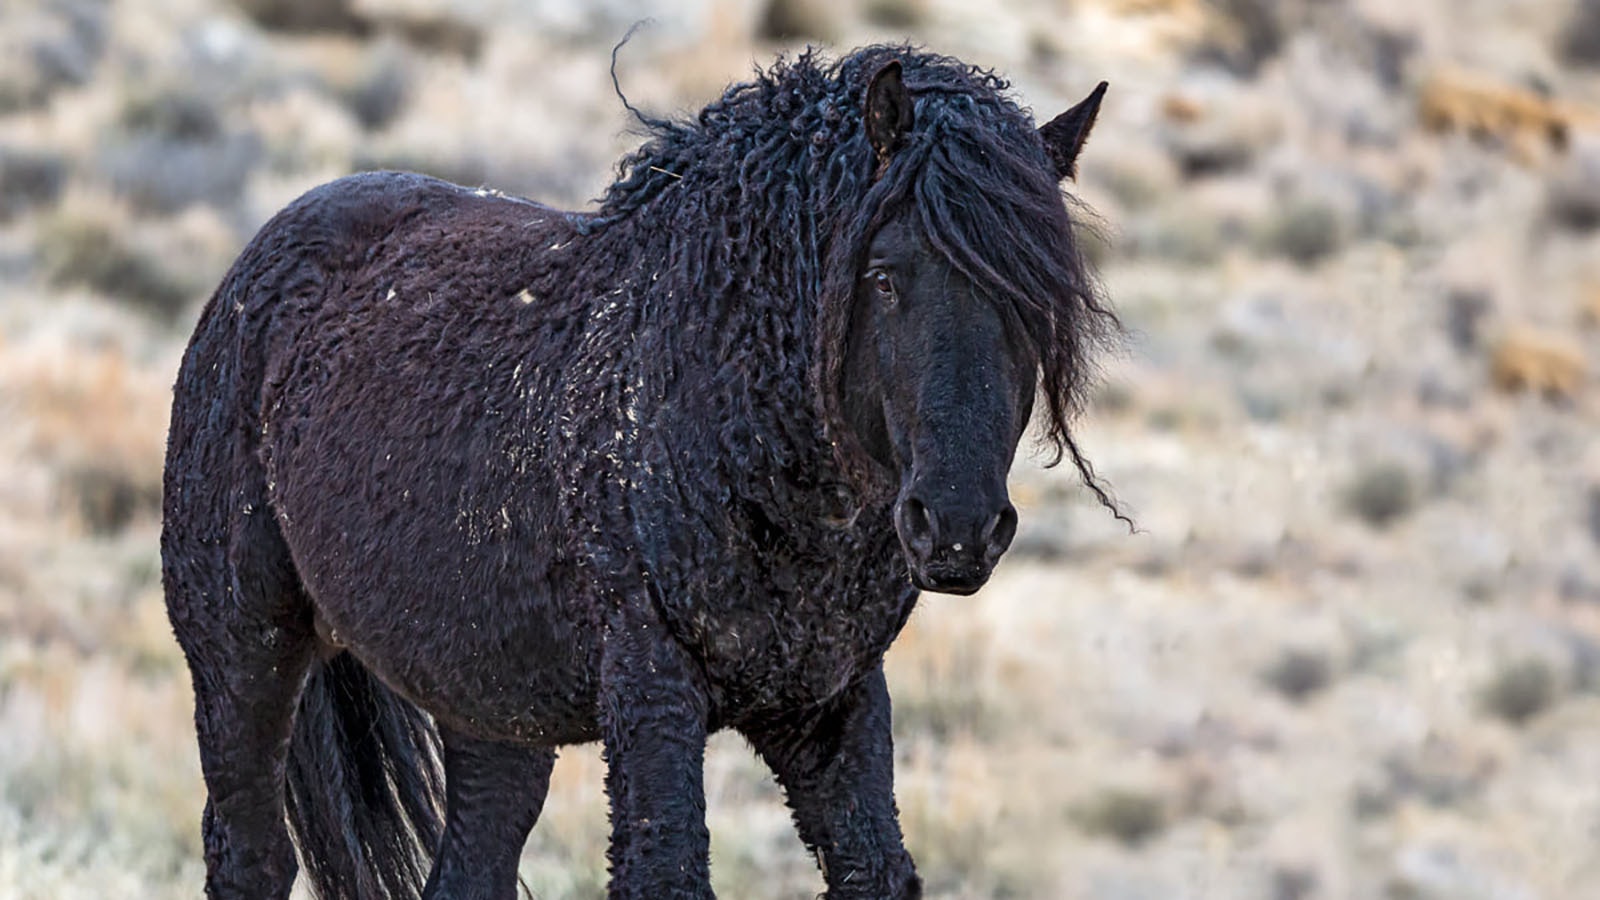 If your horse looks like this coming out of winter, be prepared for a lot of curry comb work.